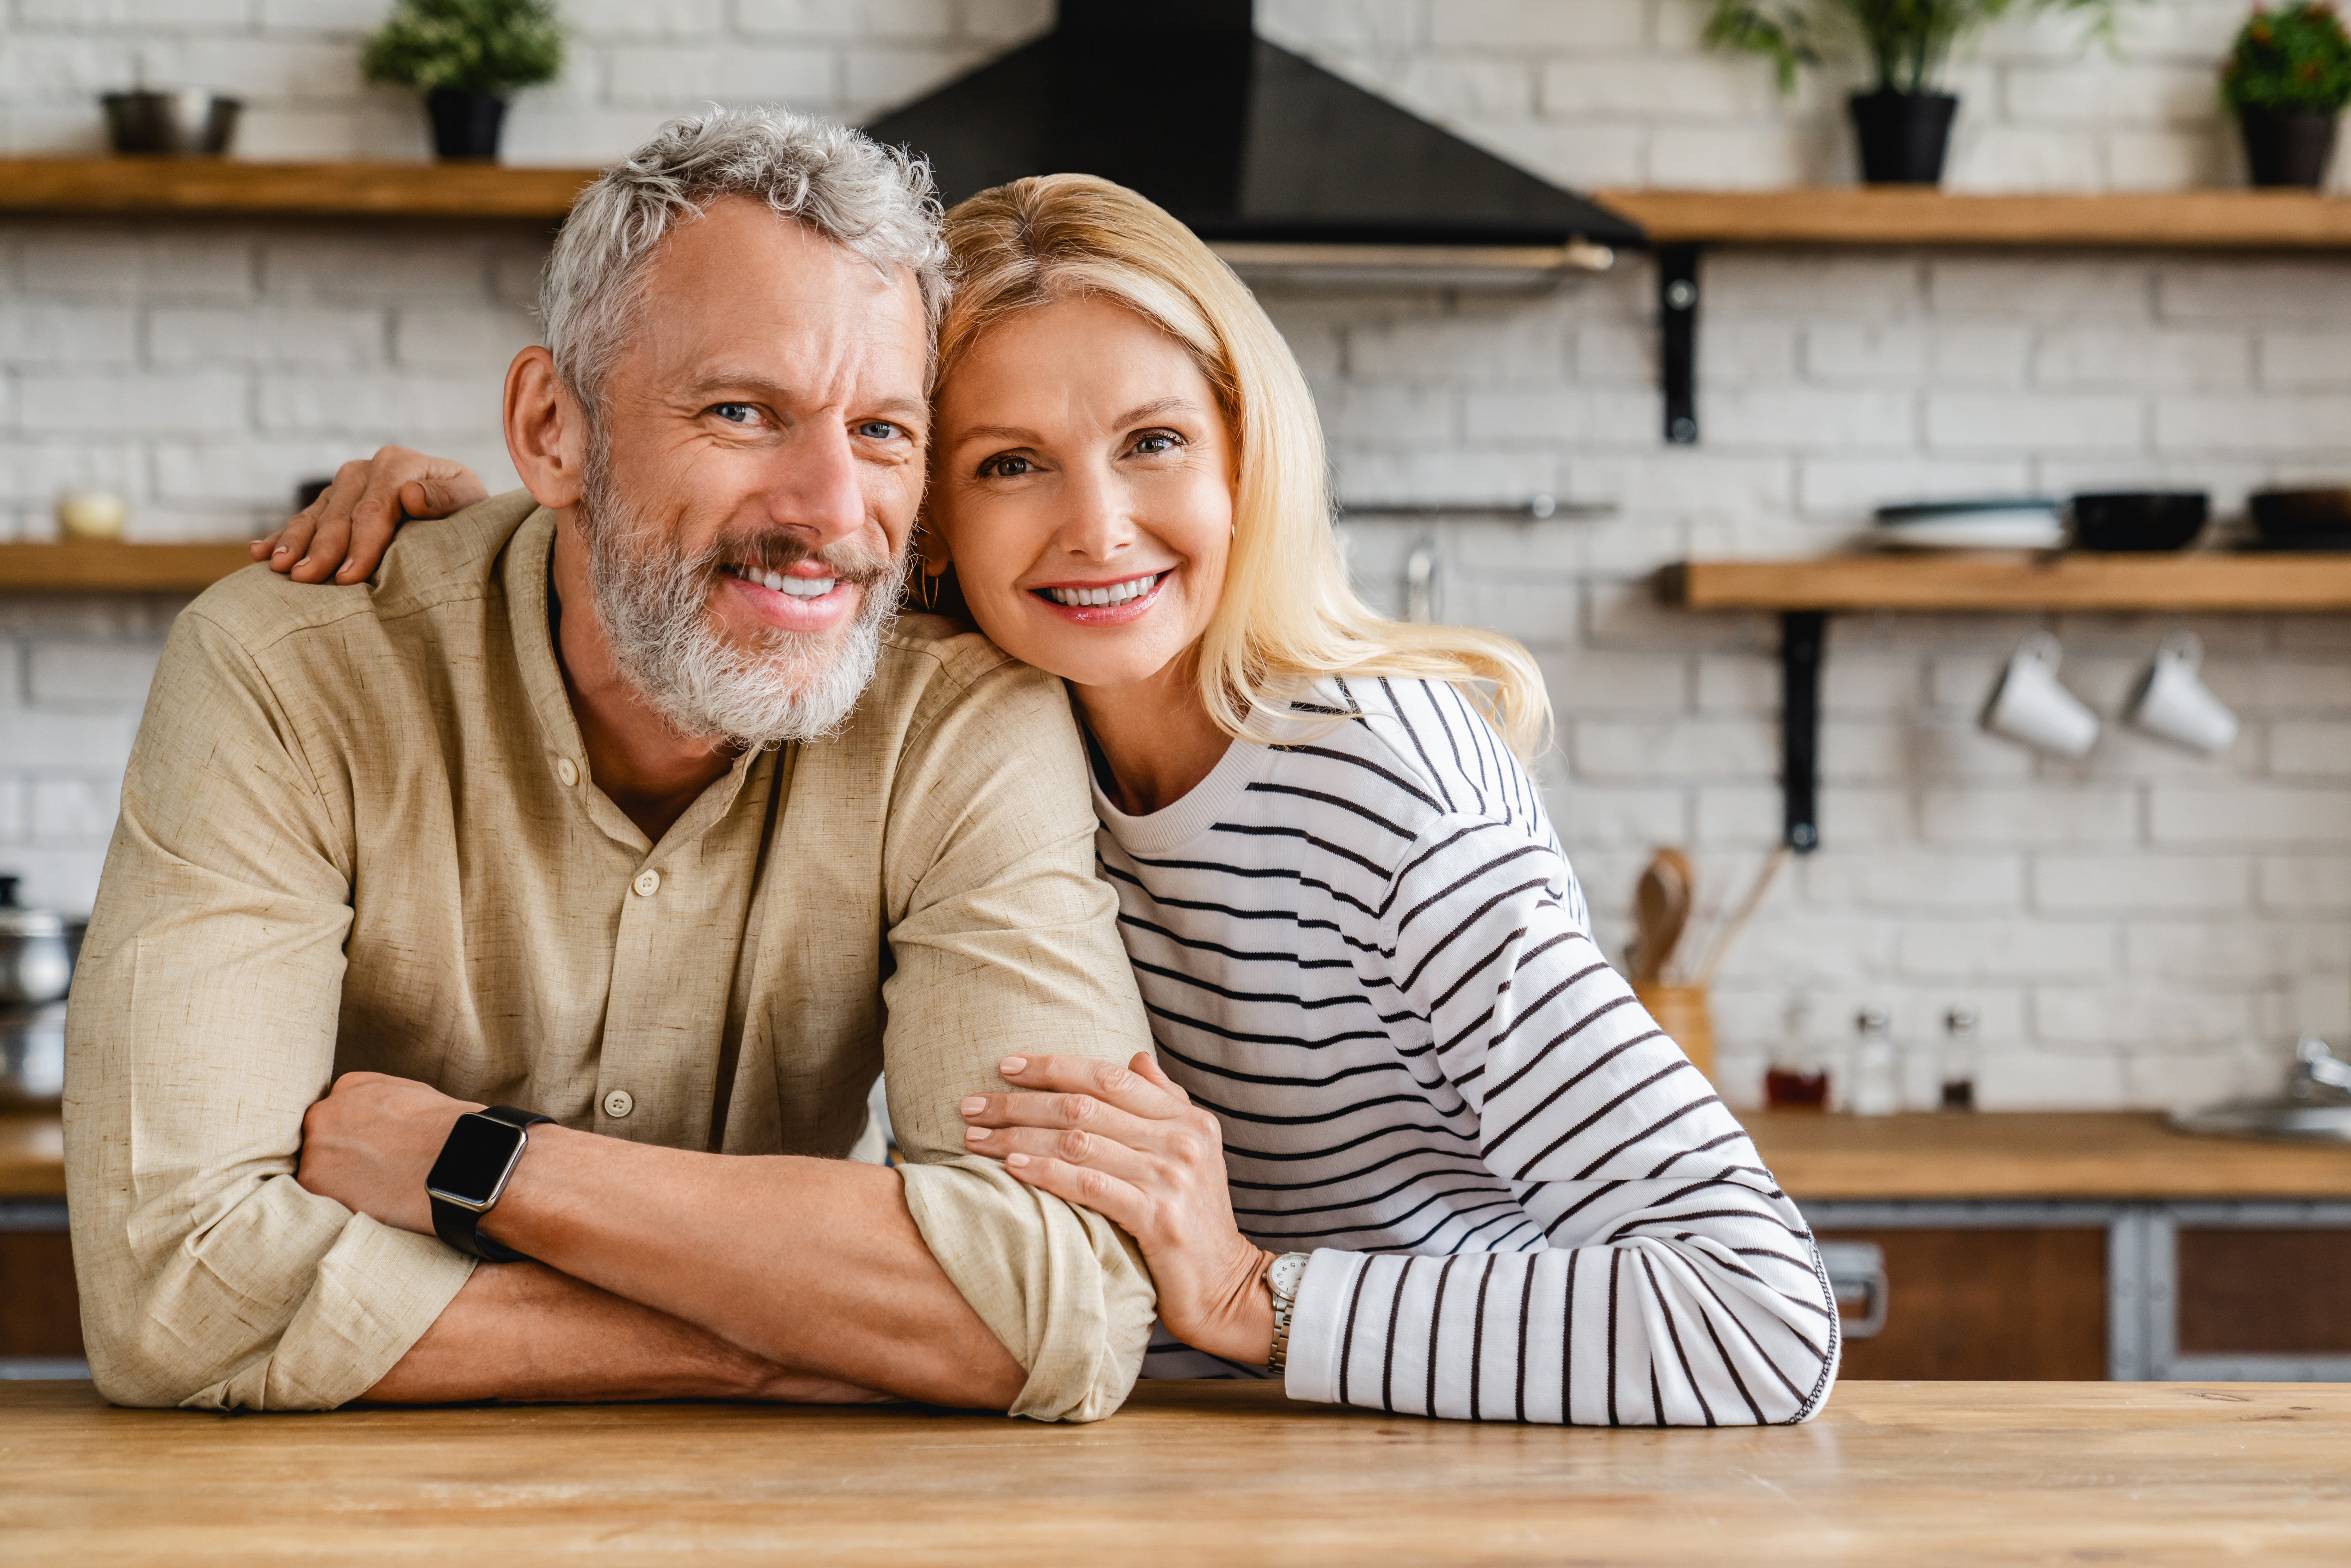 A happy middle-aged couple | Source: Shutterstock